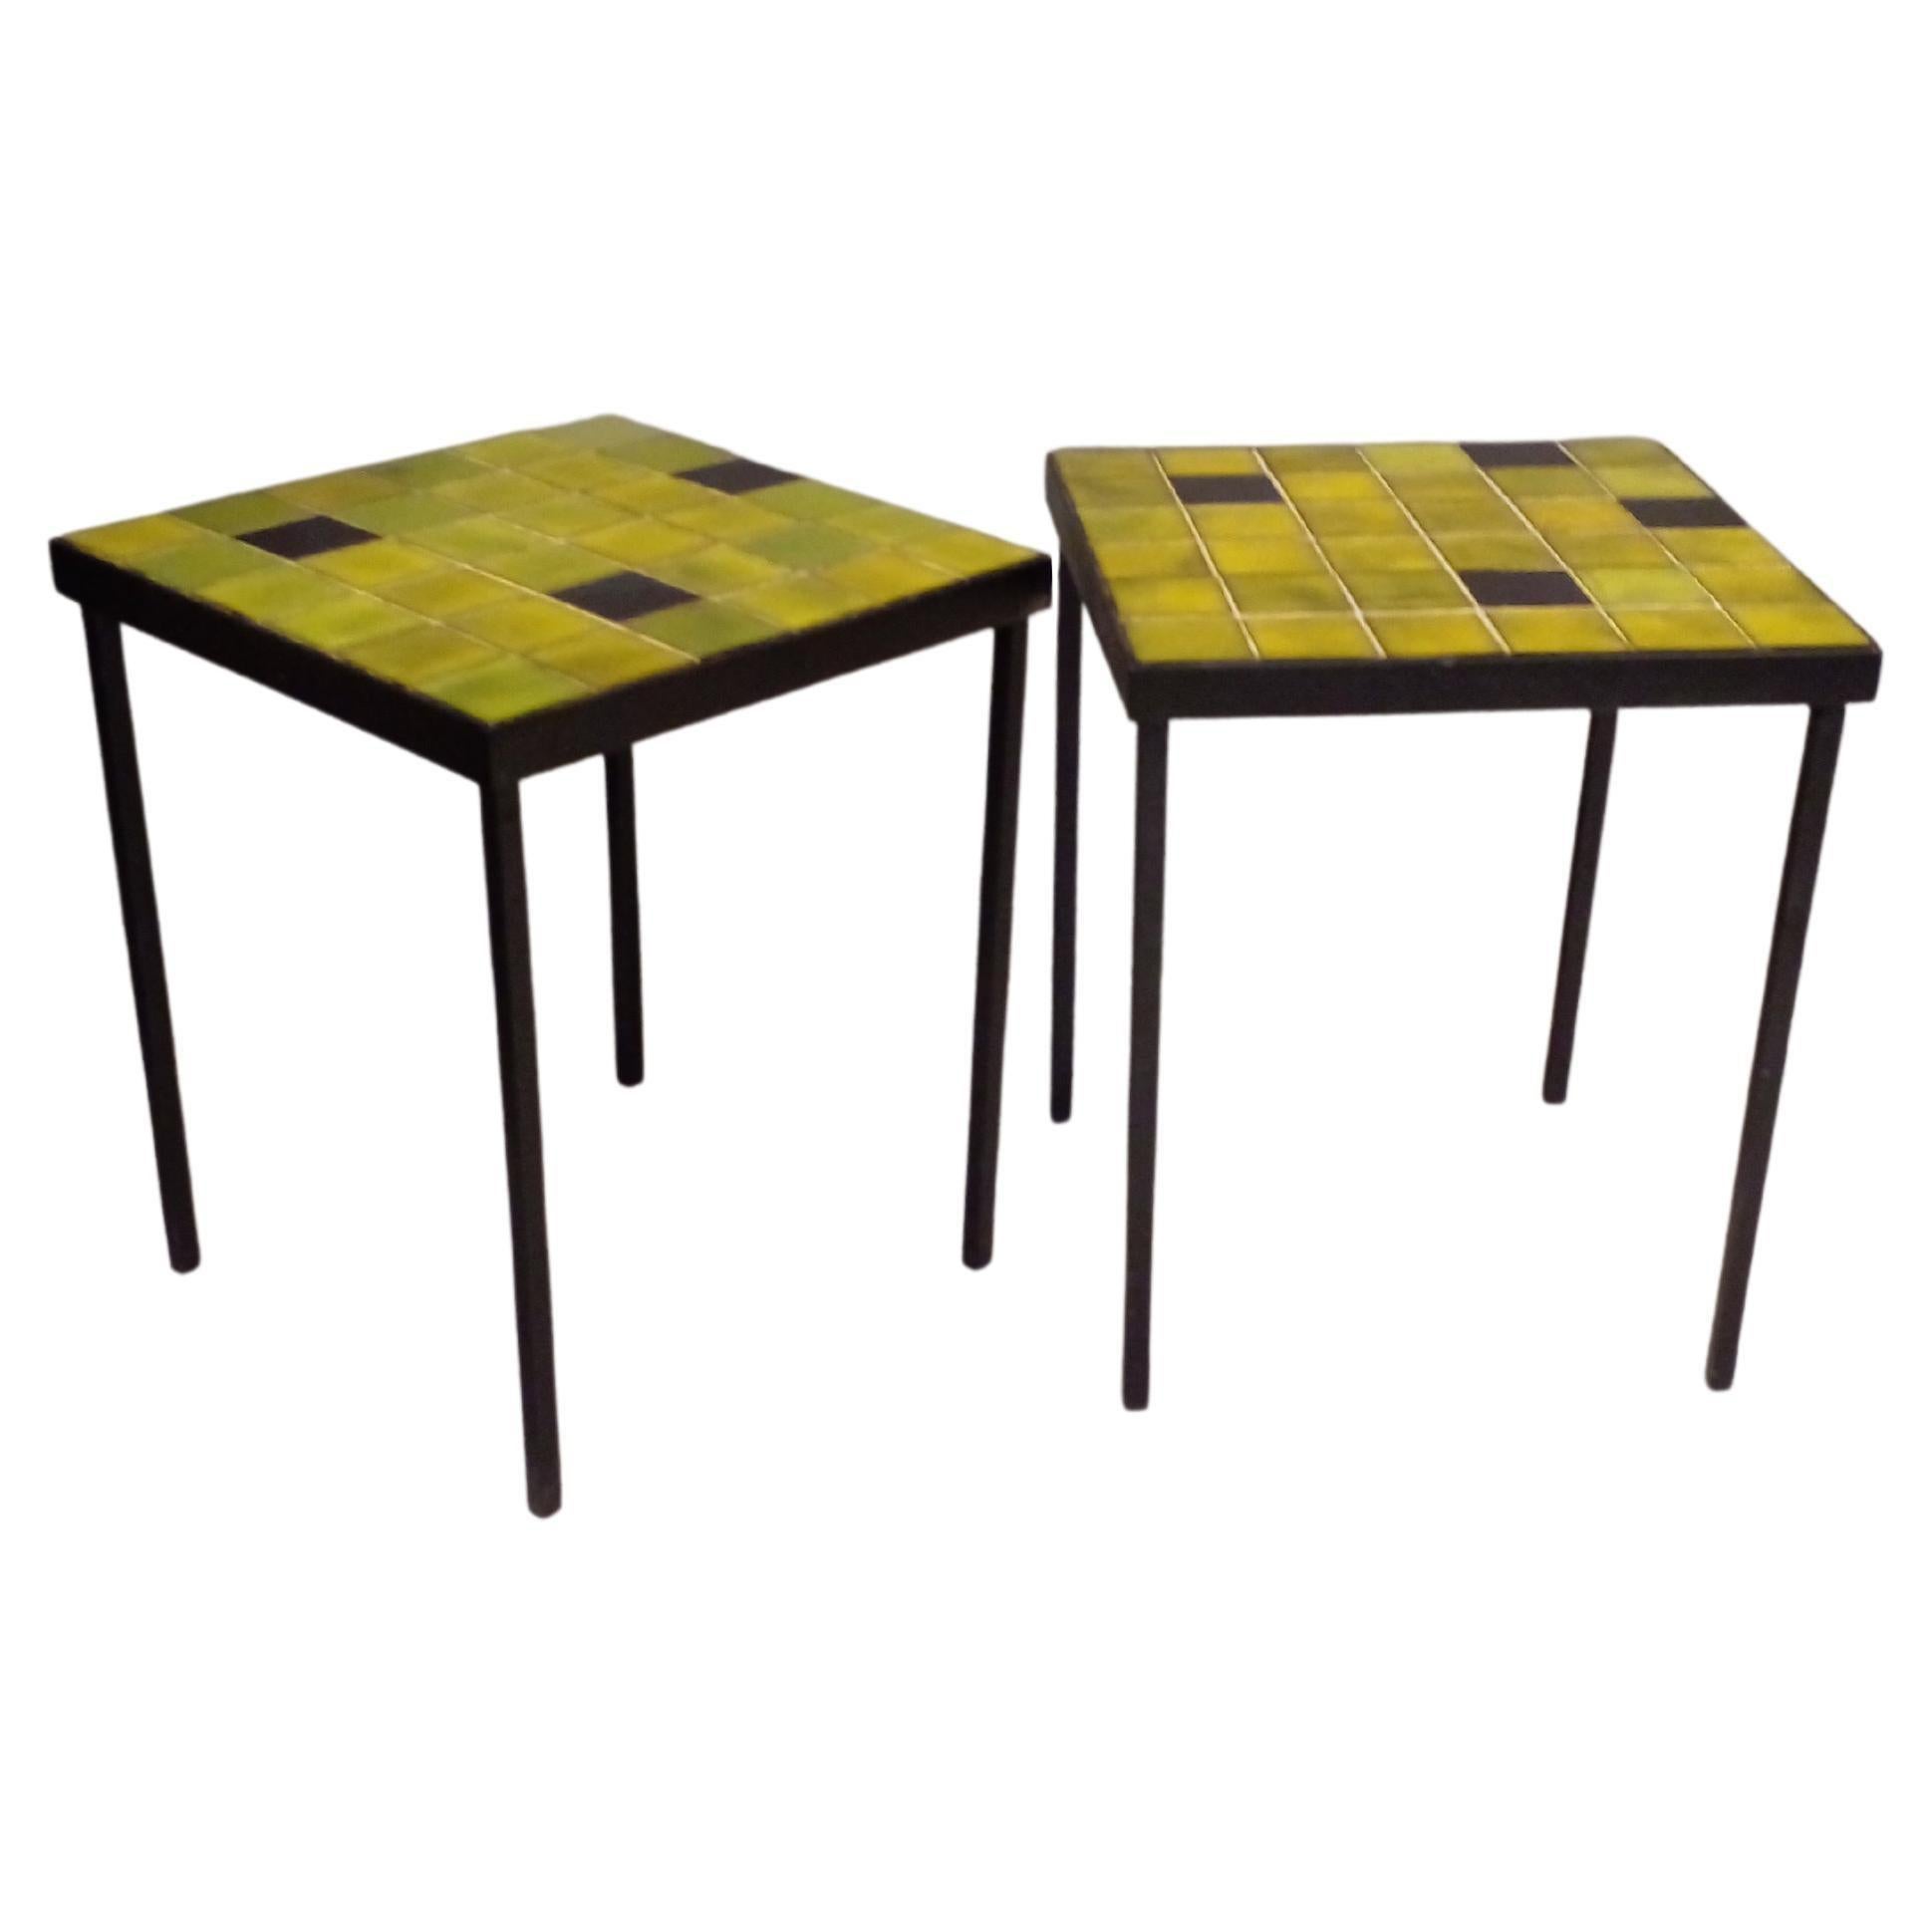  Mado Jolain and René Legrand around 1960. 
Three side tables including a pair, glazed ceramic tile tops in shades of green and black, France.
Bases in black lacquered iron.

Two tables
Width : 31.5 cm
Depth : 31.5 cm
Height : 37.5 cm
One